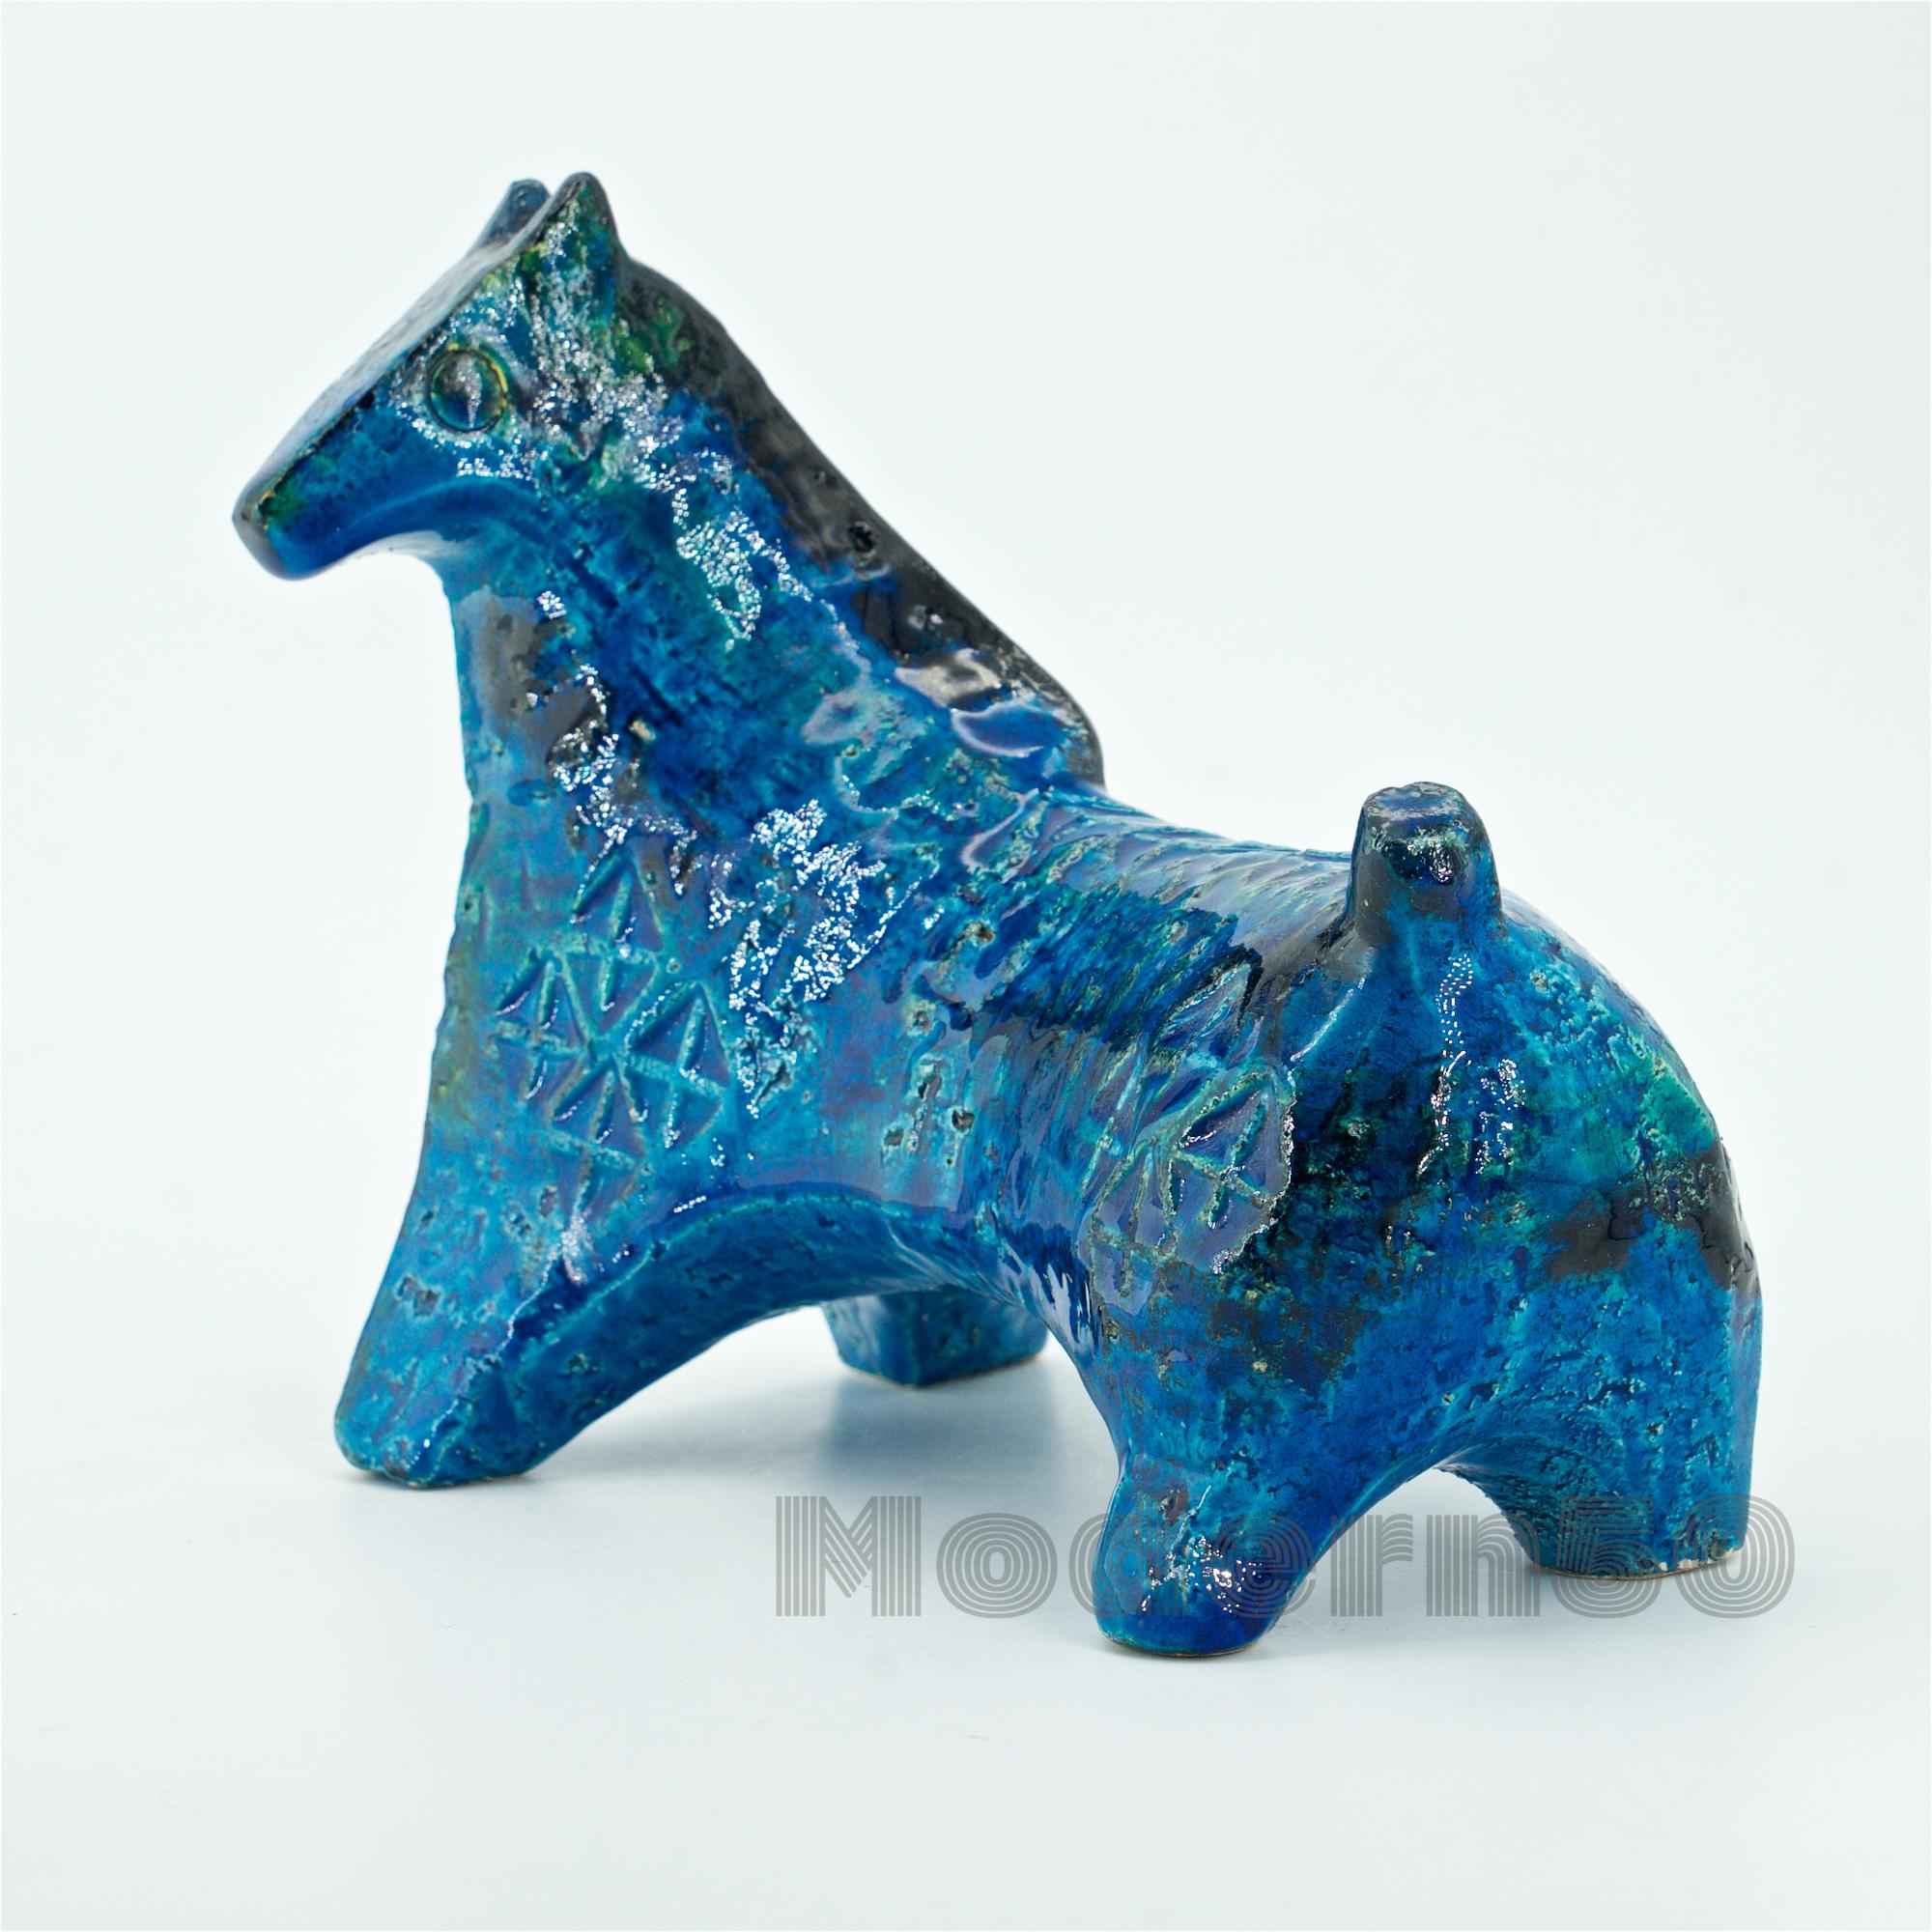 Harder to find vintage petite horse. Designed by Aldo Londi in the Blue Rimini style series for Bitossi, Italy.